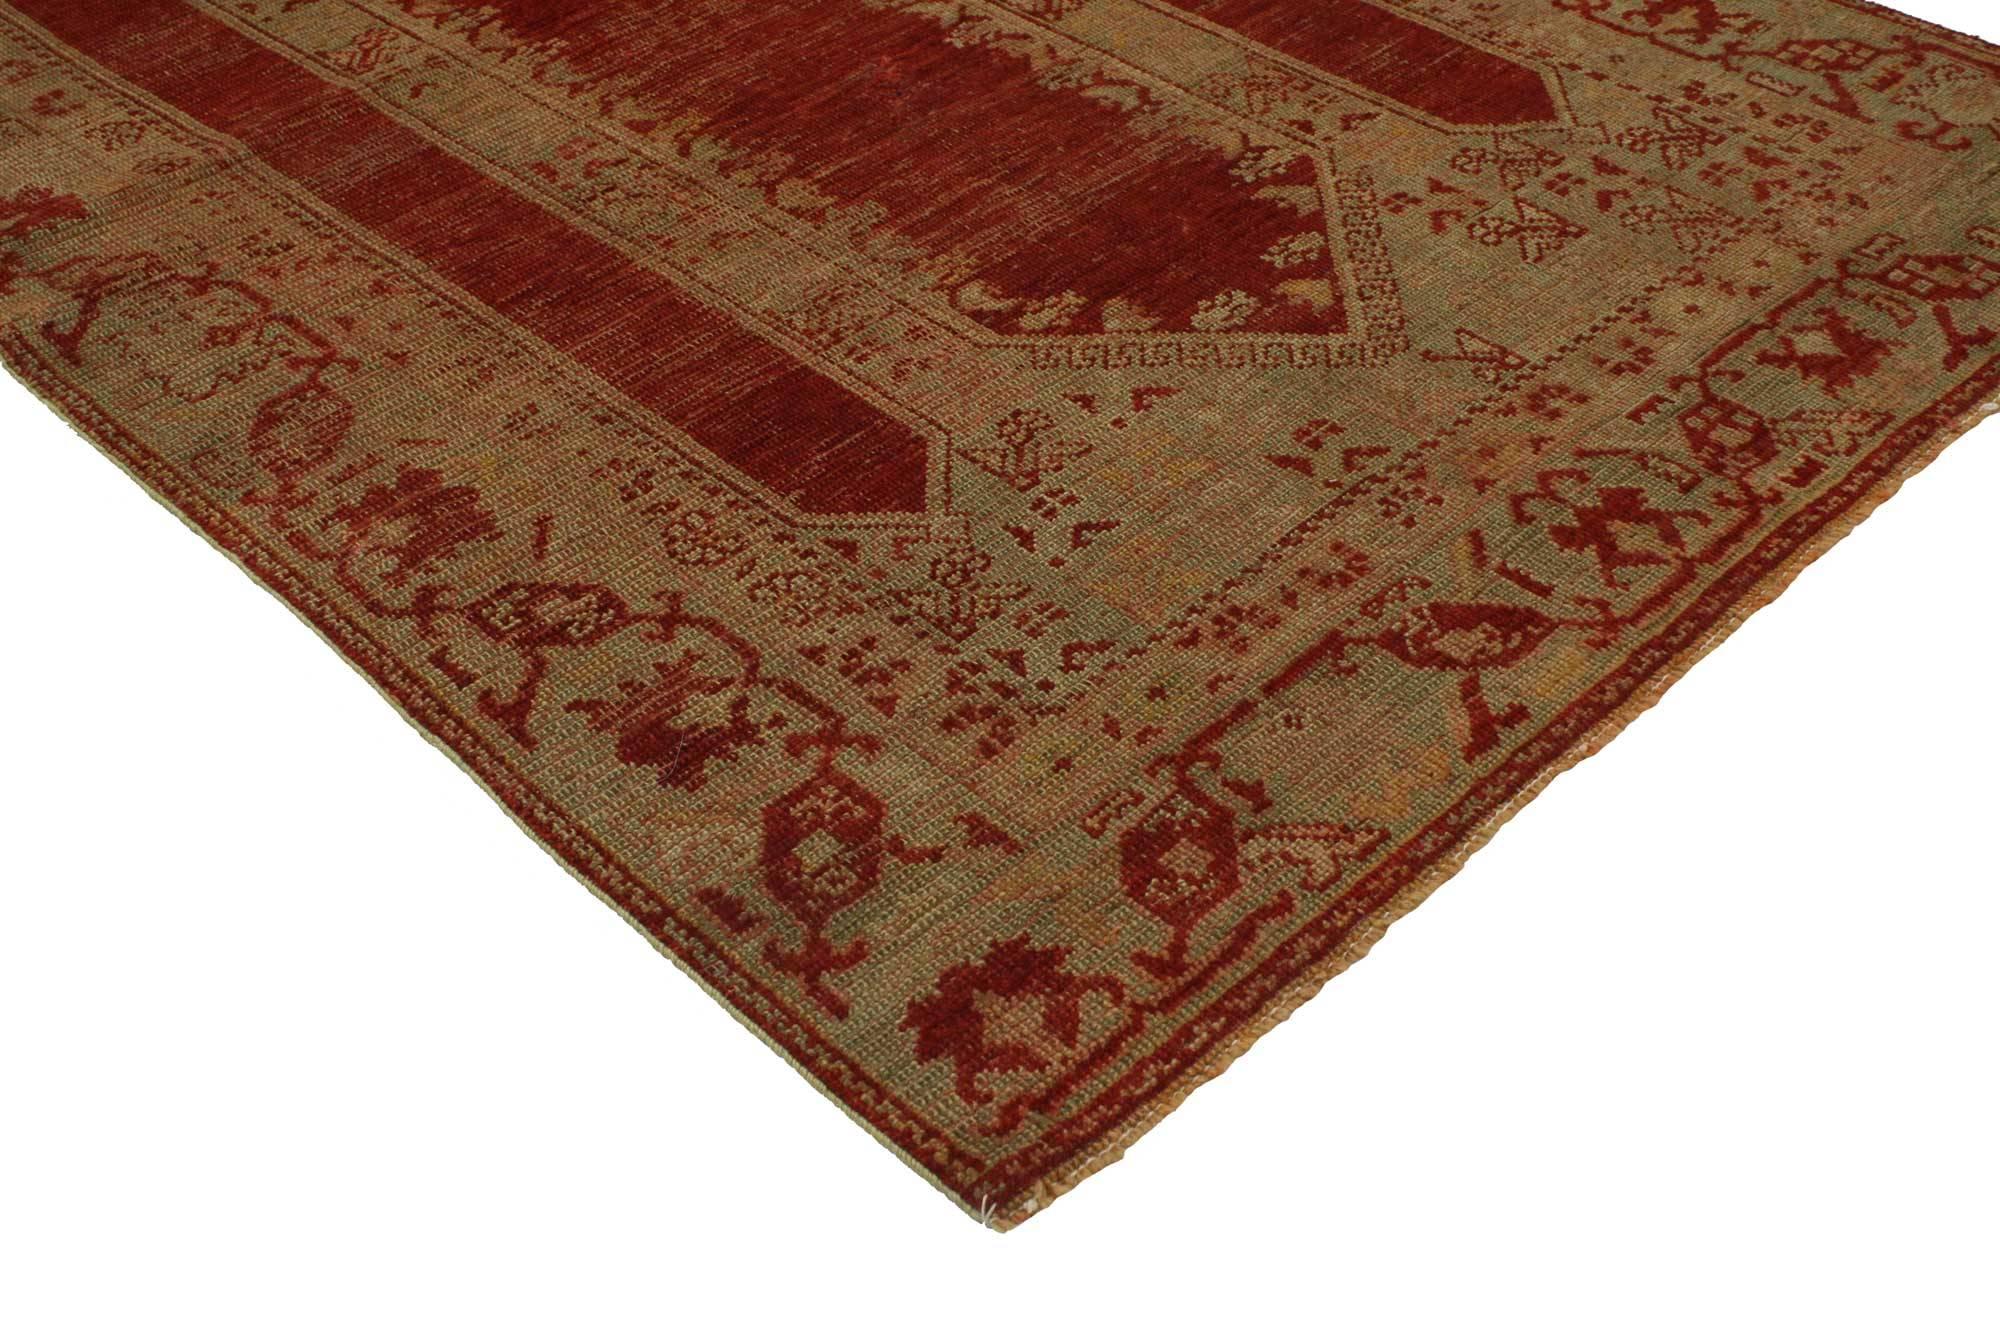 51696 Distressed Vintage Turkish Prayer Rug with Triple Arch Niche Design 03'05 x 05'08. This hand knotted wool distressed vintage Turkish prayer rug features a triple arch design on a weathered and saturated ruby red backdrop. The middle mihrab